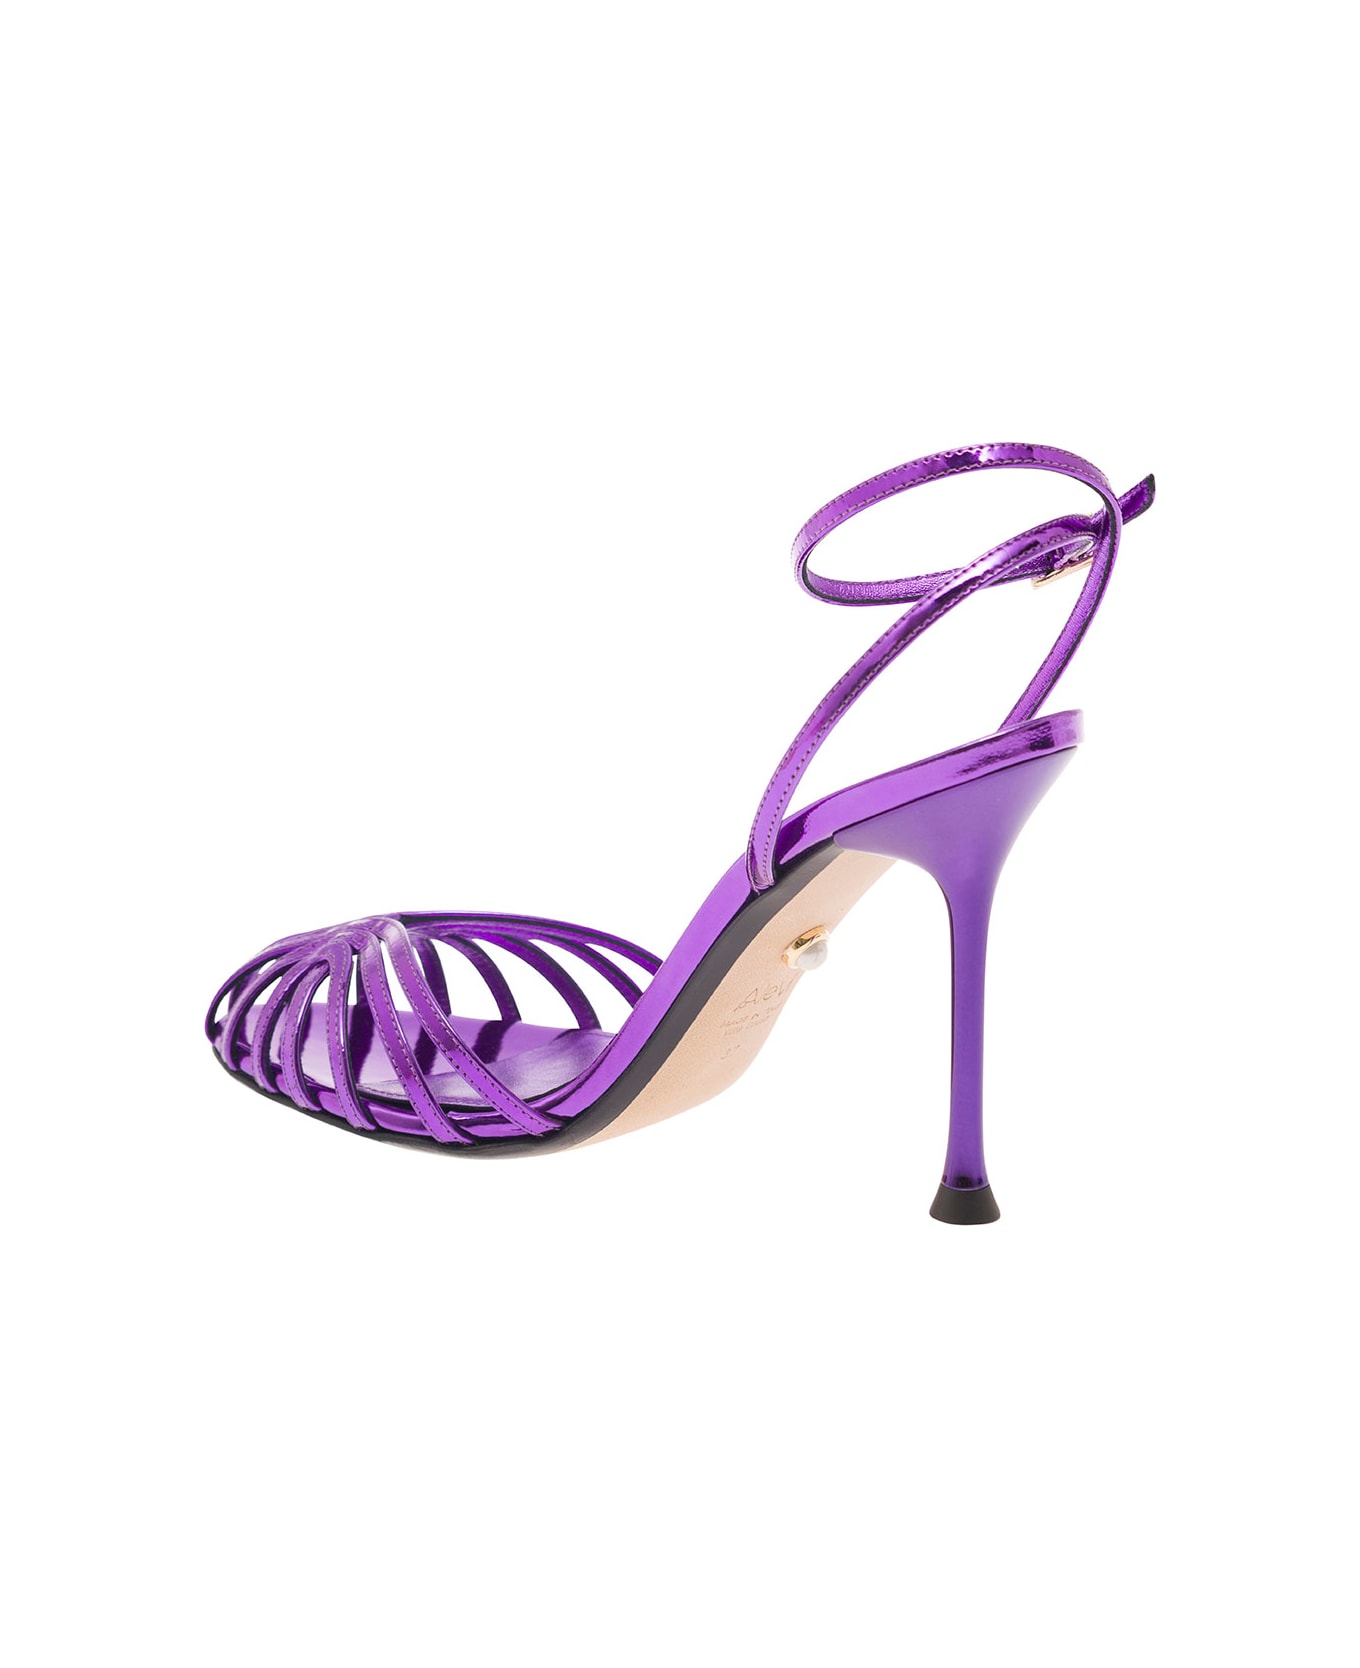 Alevì 'ally' Purple Sandals With Stiletto Heel In Metallic Leather Woman - Violet